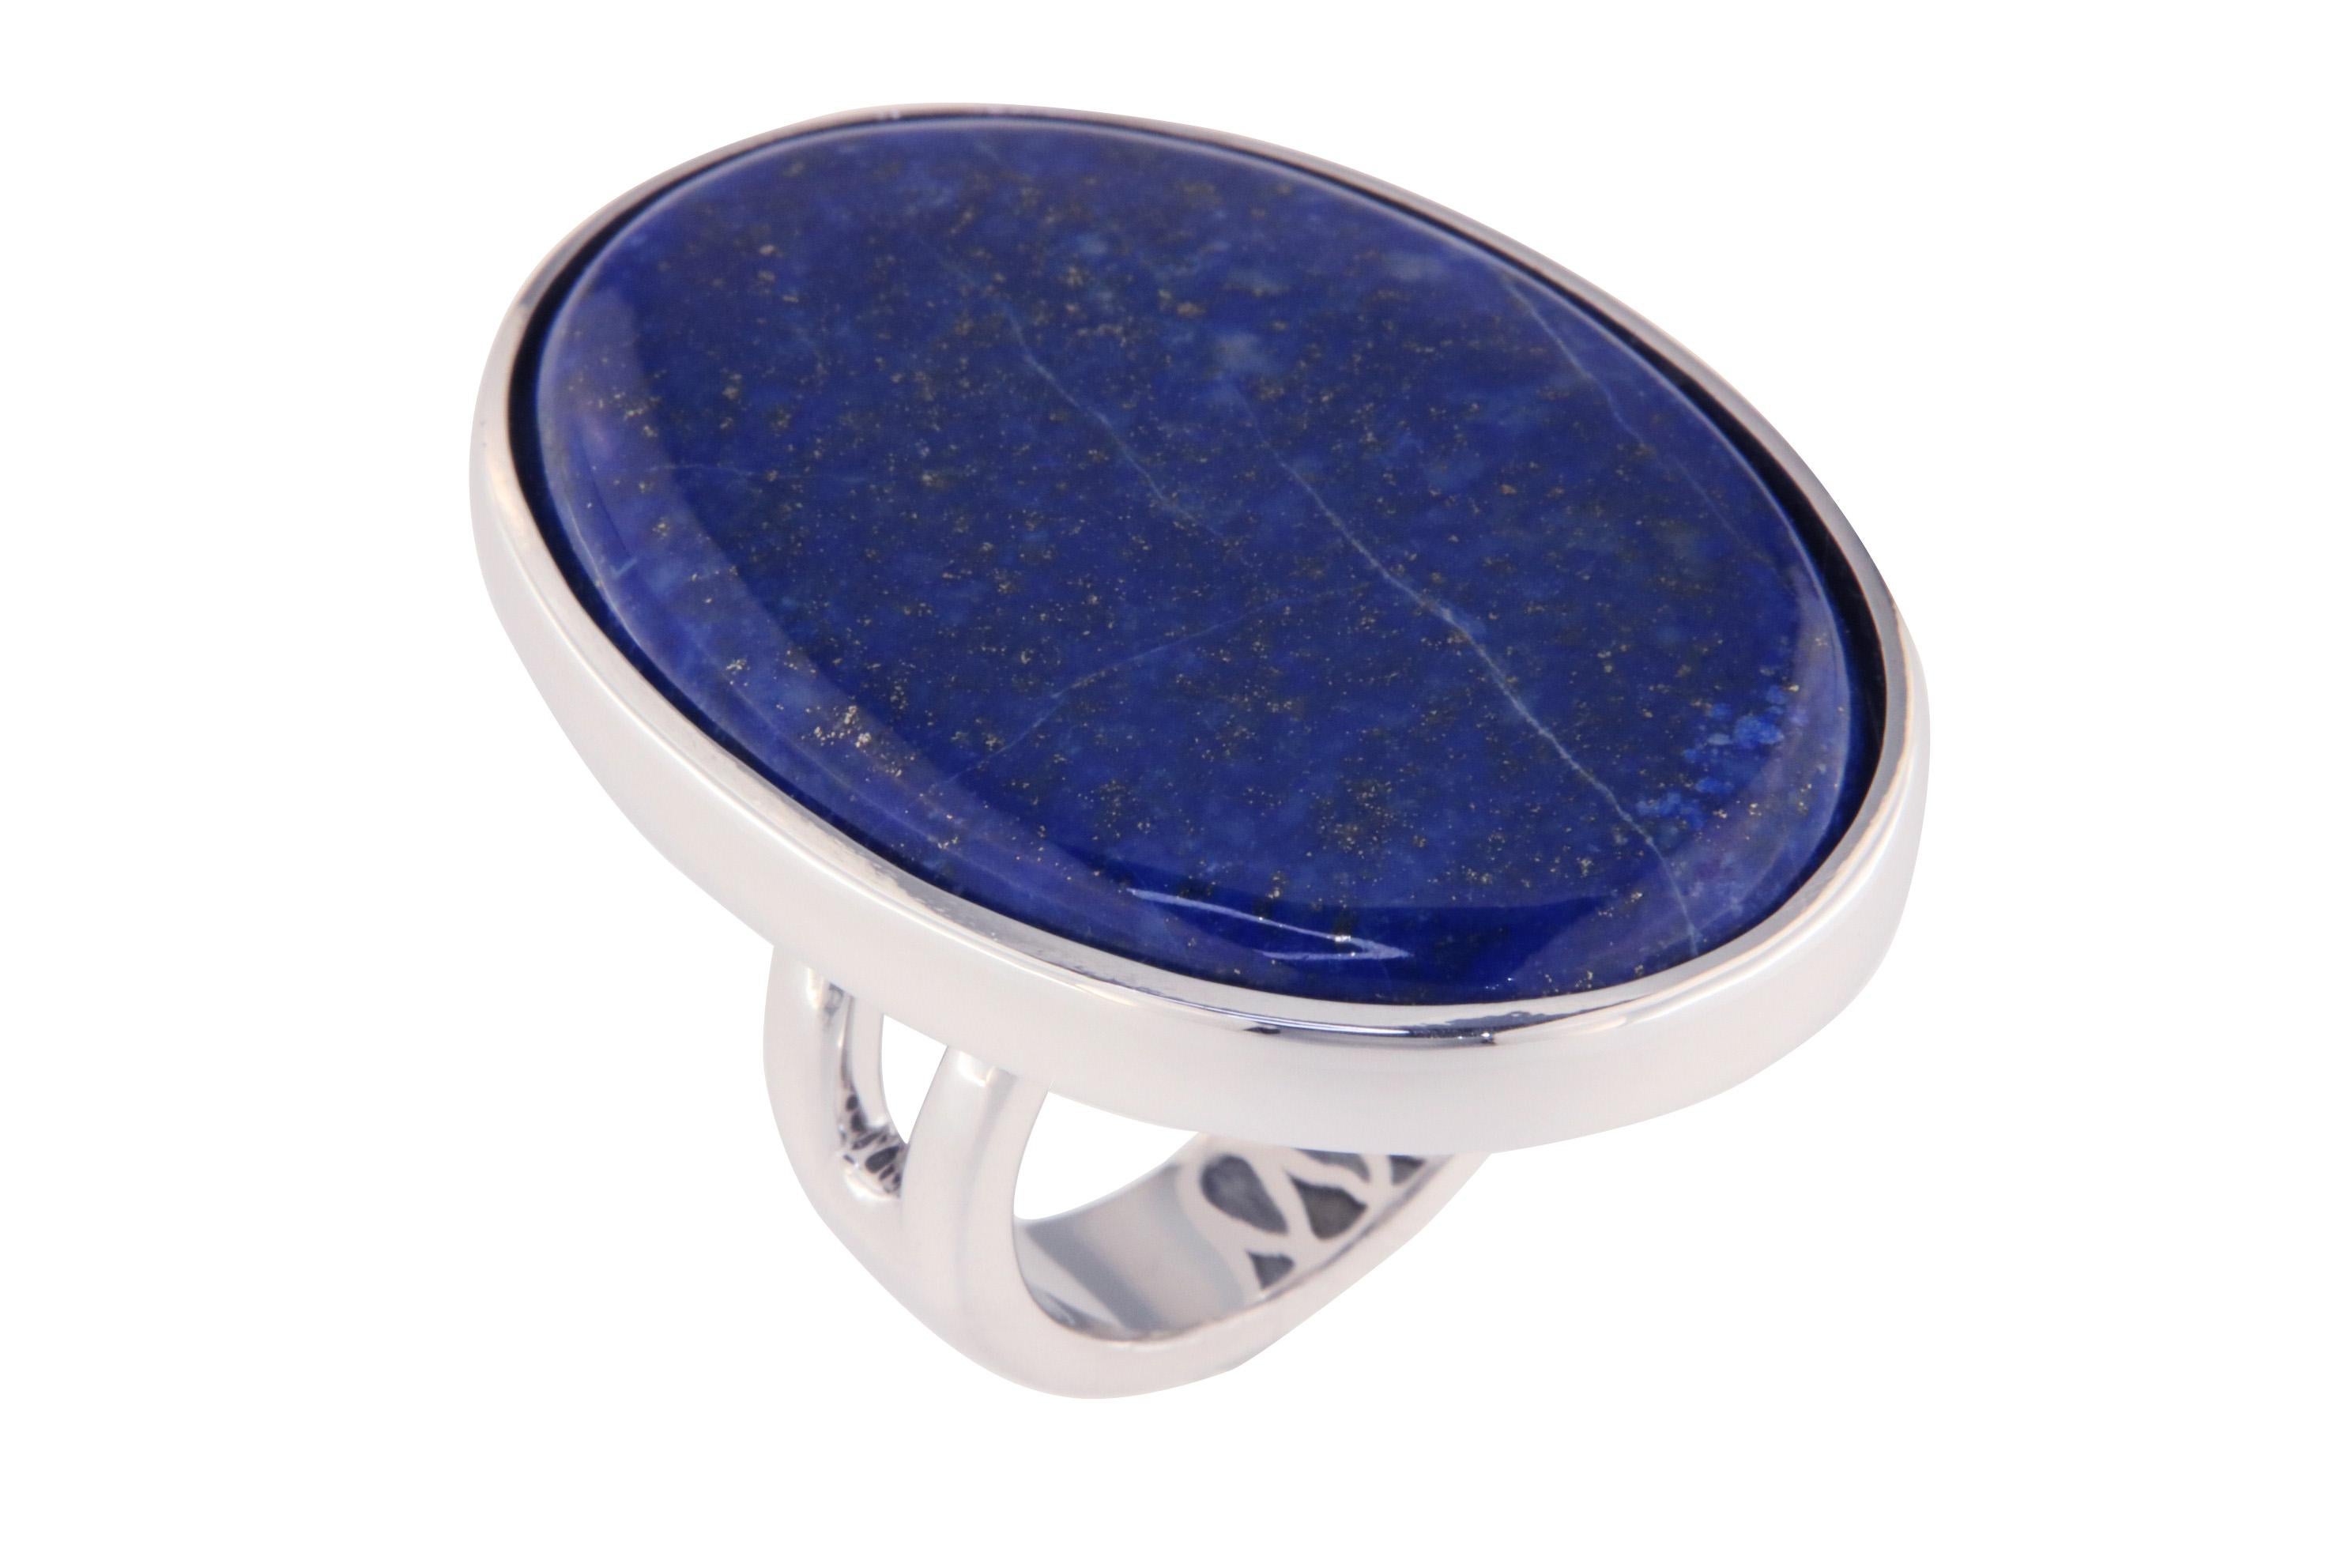 Orloff of Denmark; 78 carat Lapis Lazuli Ring fashioned out of 925 Sterling Silver.


This exquisite ring is crowned with a 78-carat lapis lazuli, revered for its rich, deep blue color with natural flecks of pyrite that sparkle like tiny stars. Cut